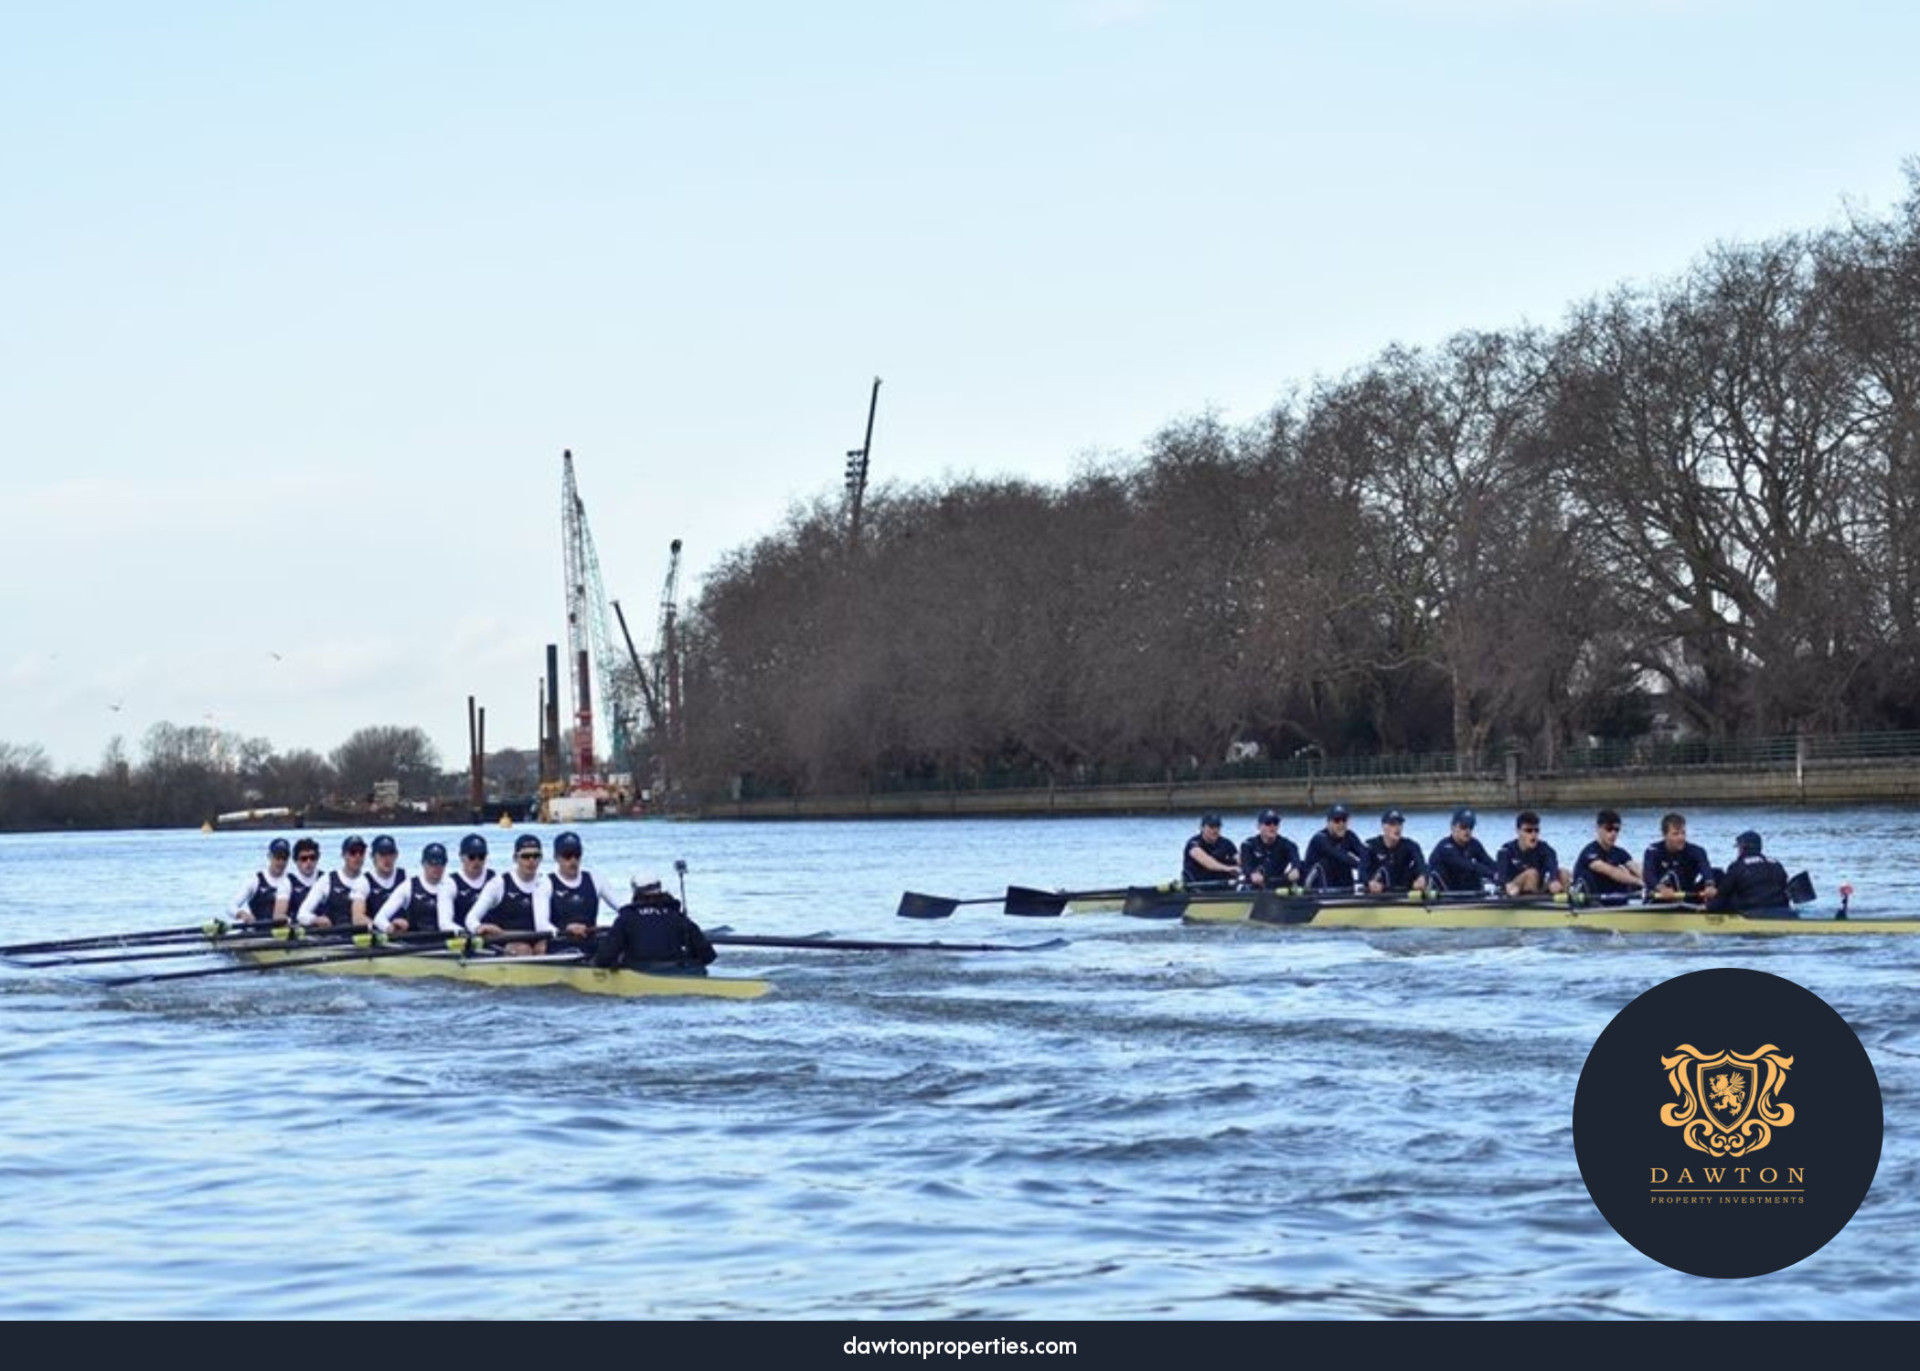 5 Things You Need to Know About the Annual Boat Race | Dawton Properties